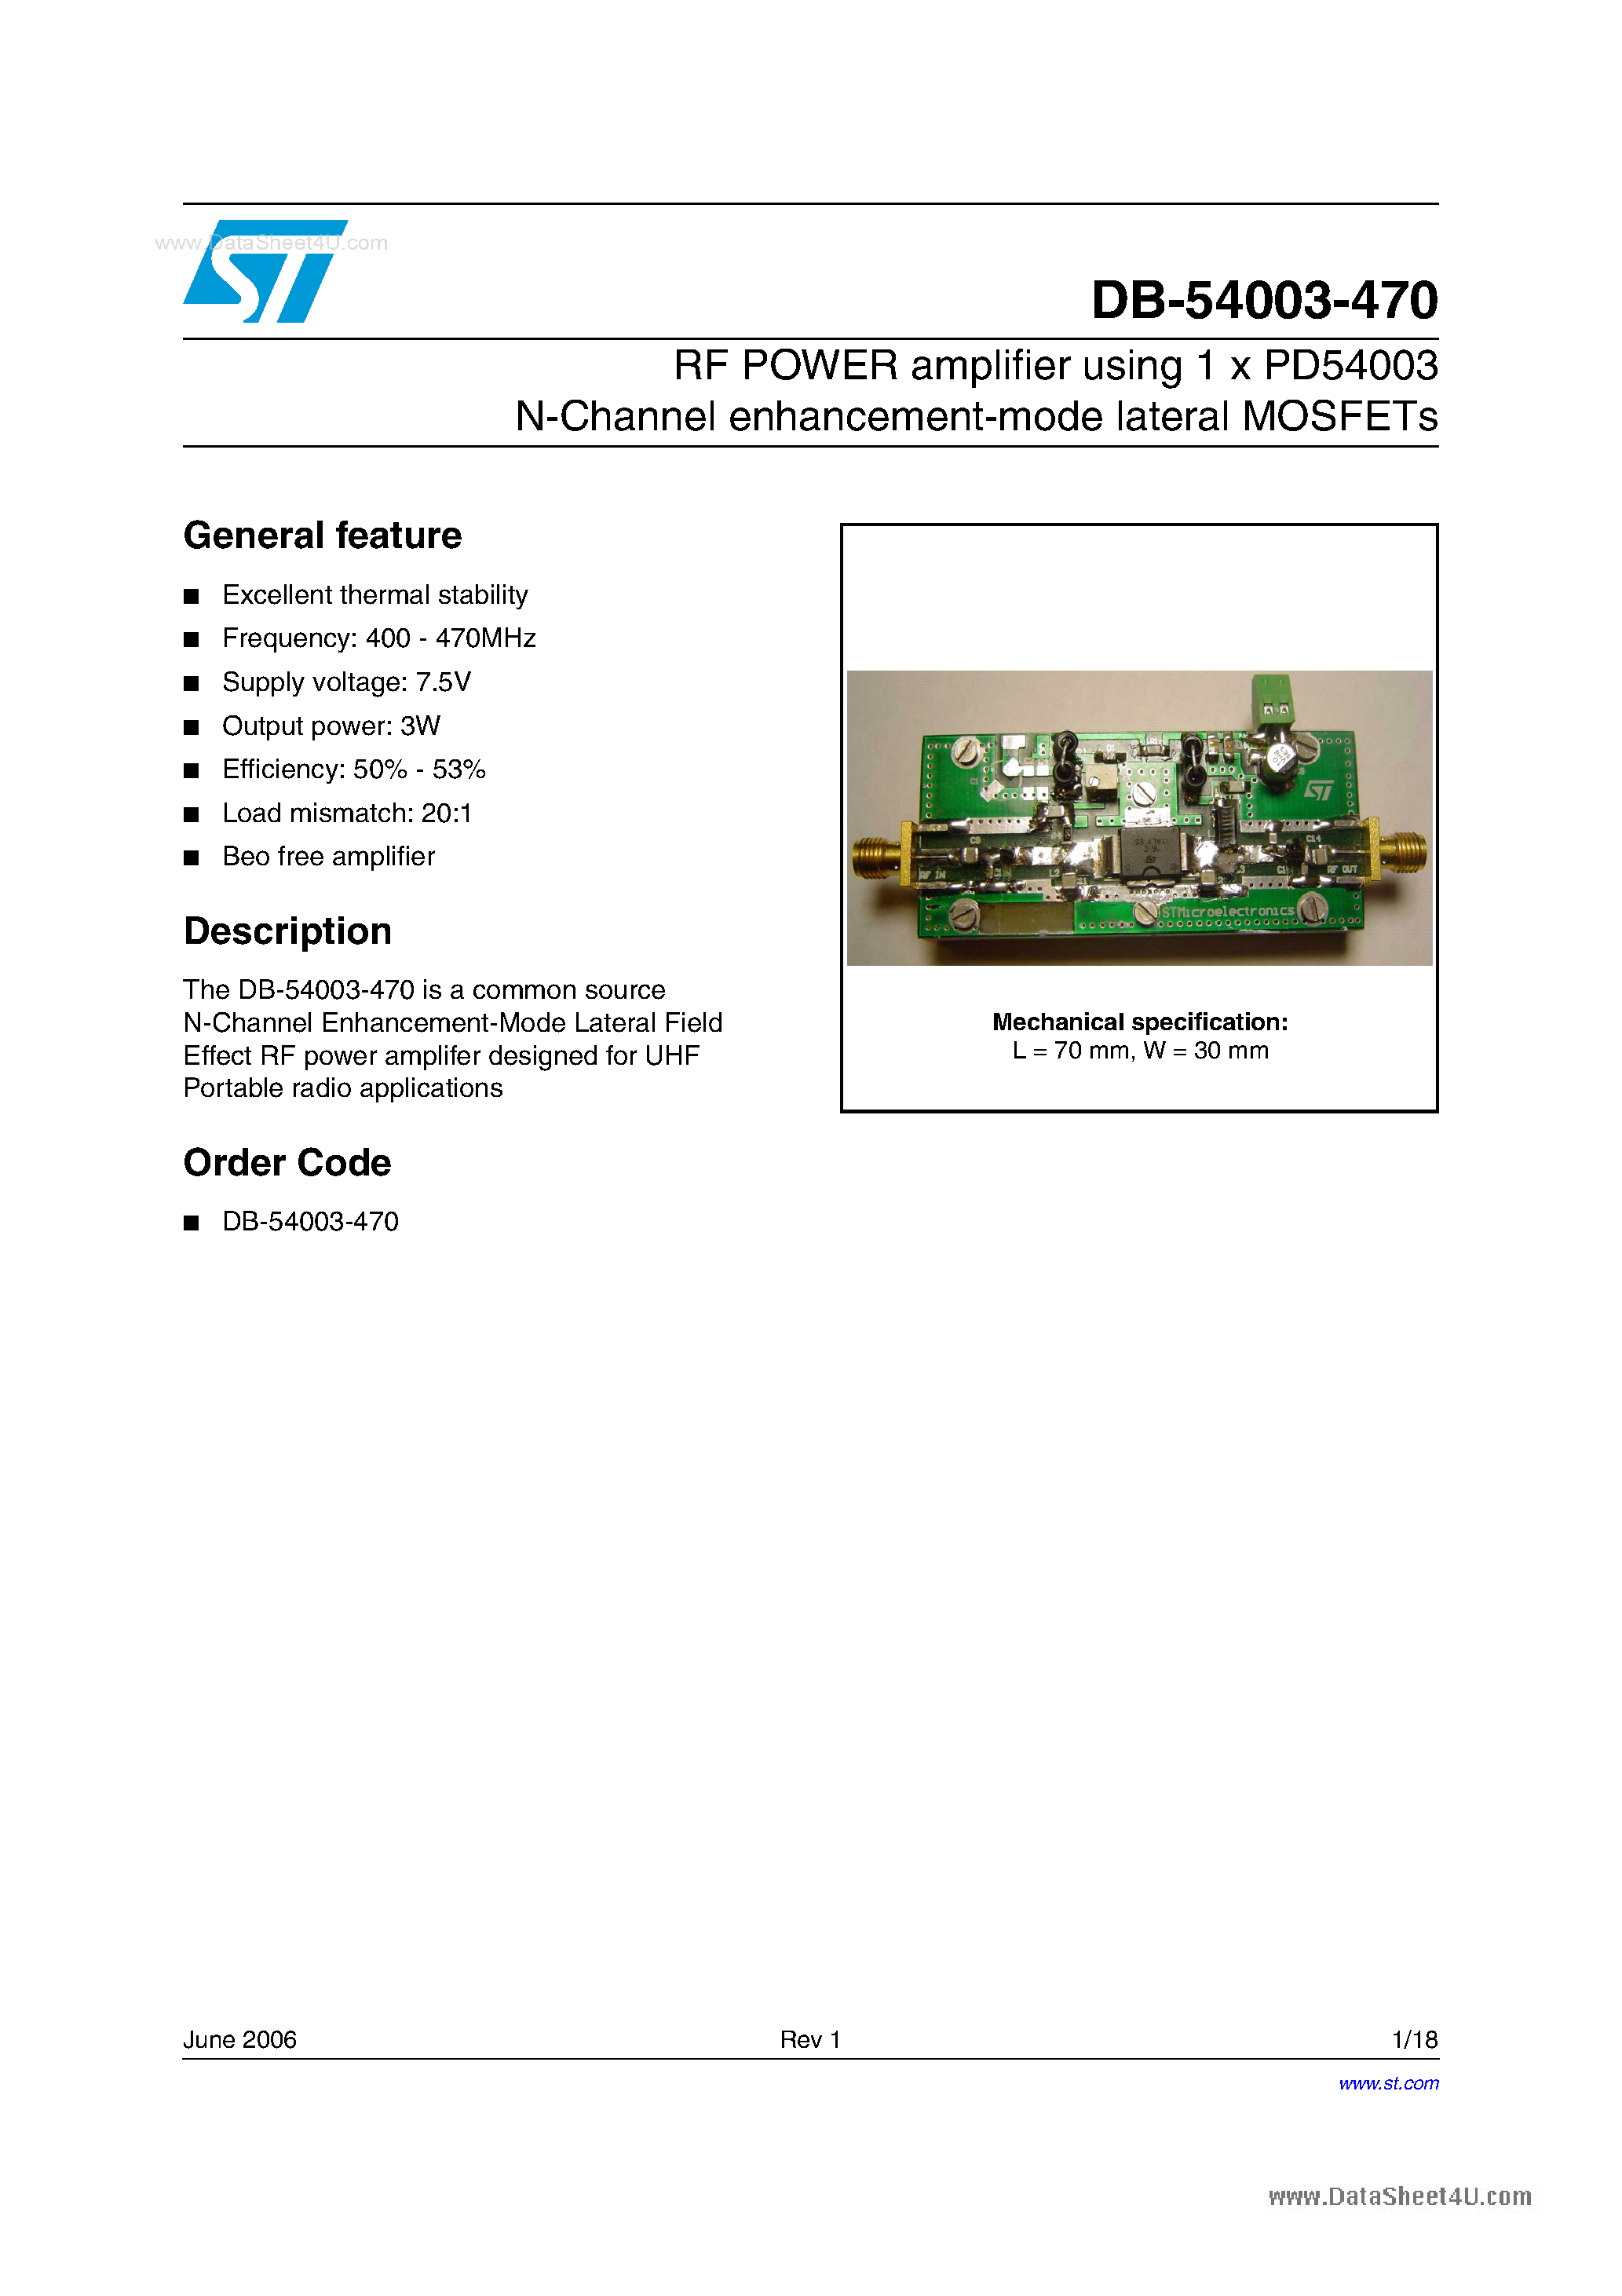 Datasheet DB-54003-470 - RF POWER amplifier using 1 x PD54003 N-Channel enhancement-mode lateral MOSFETs page 1